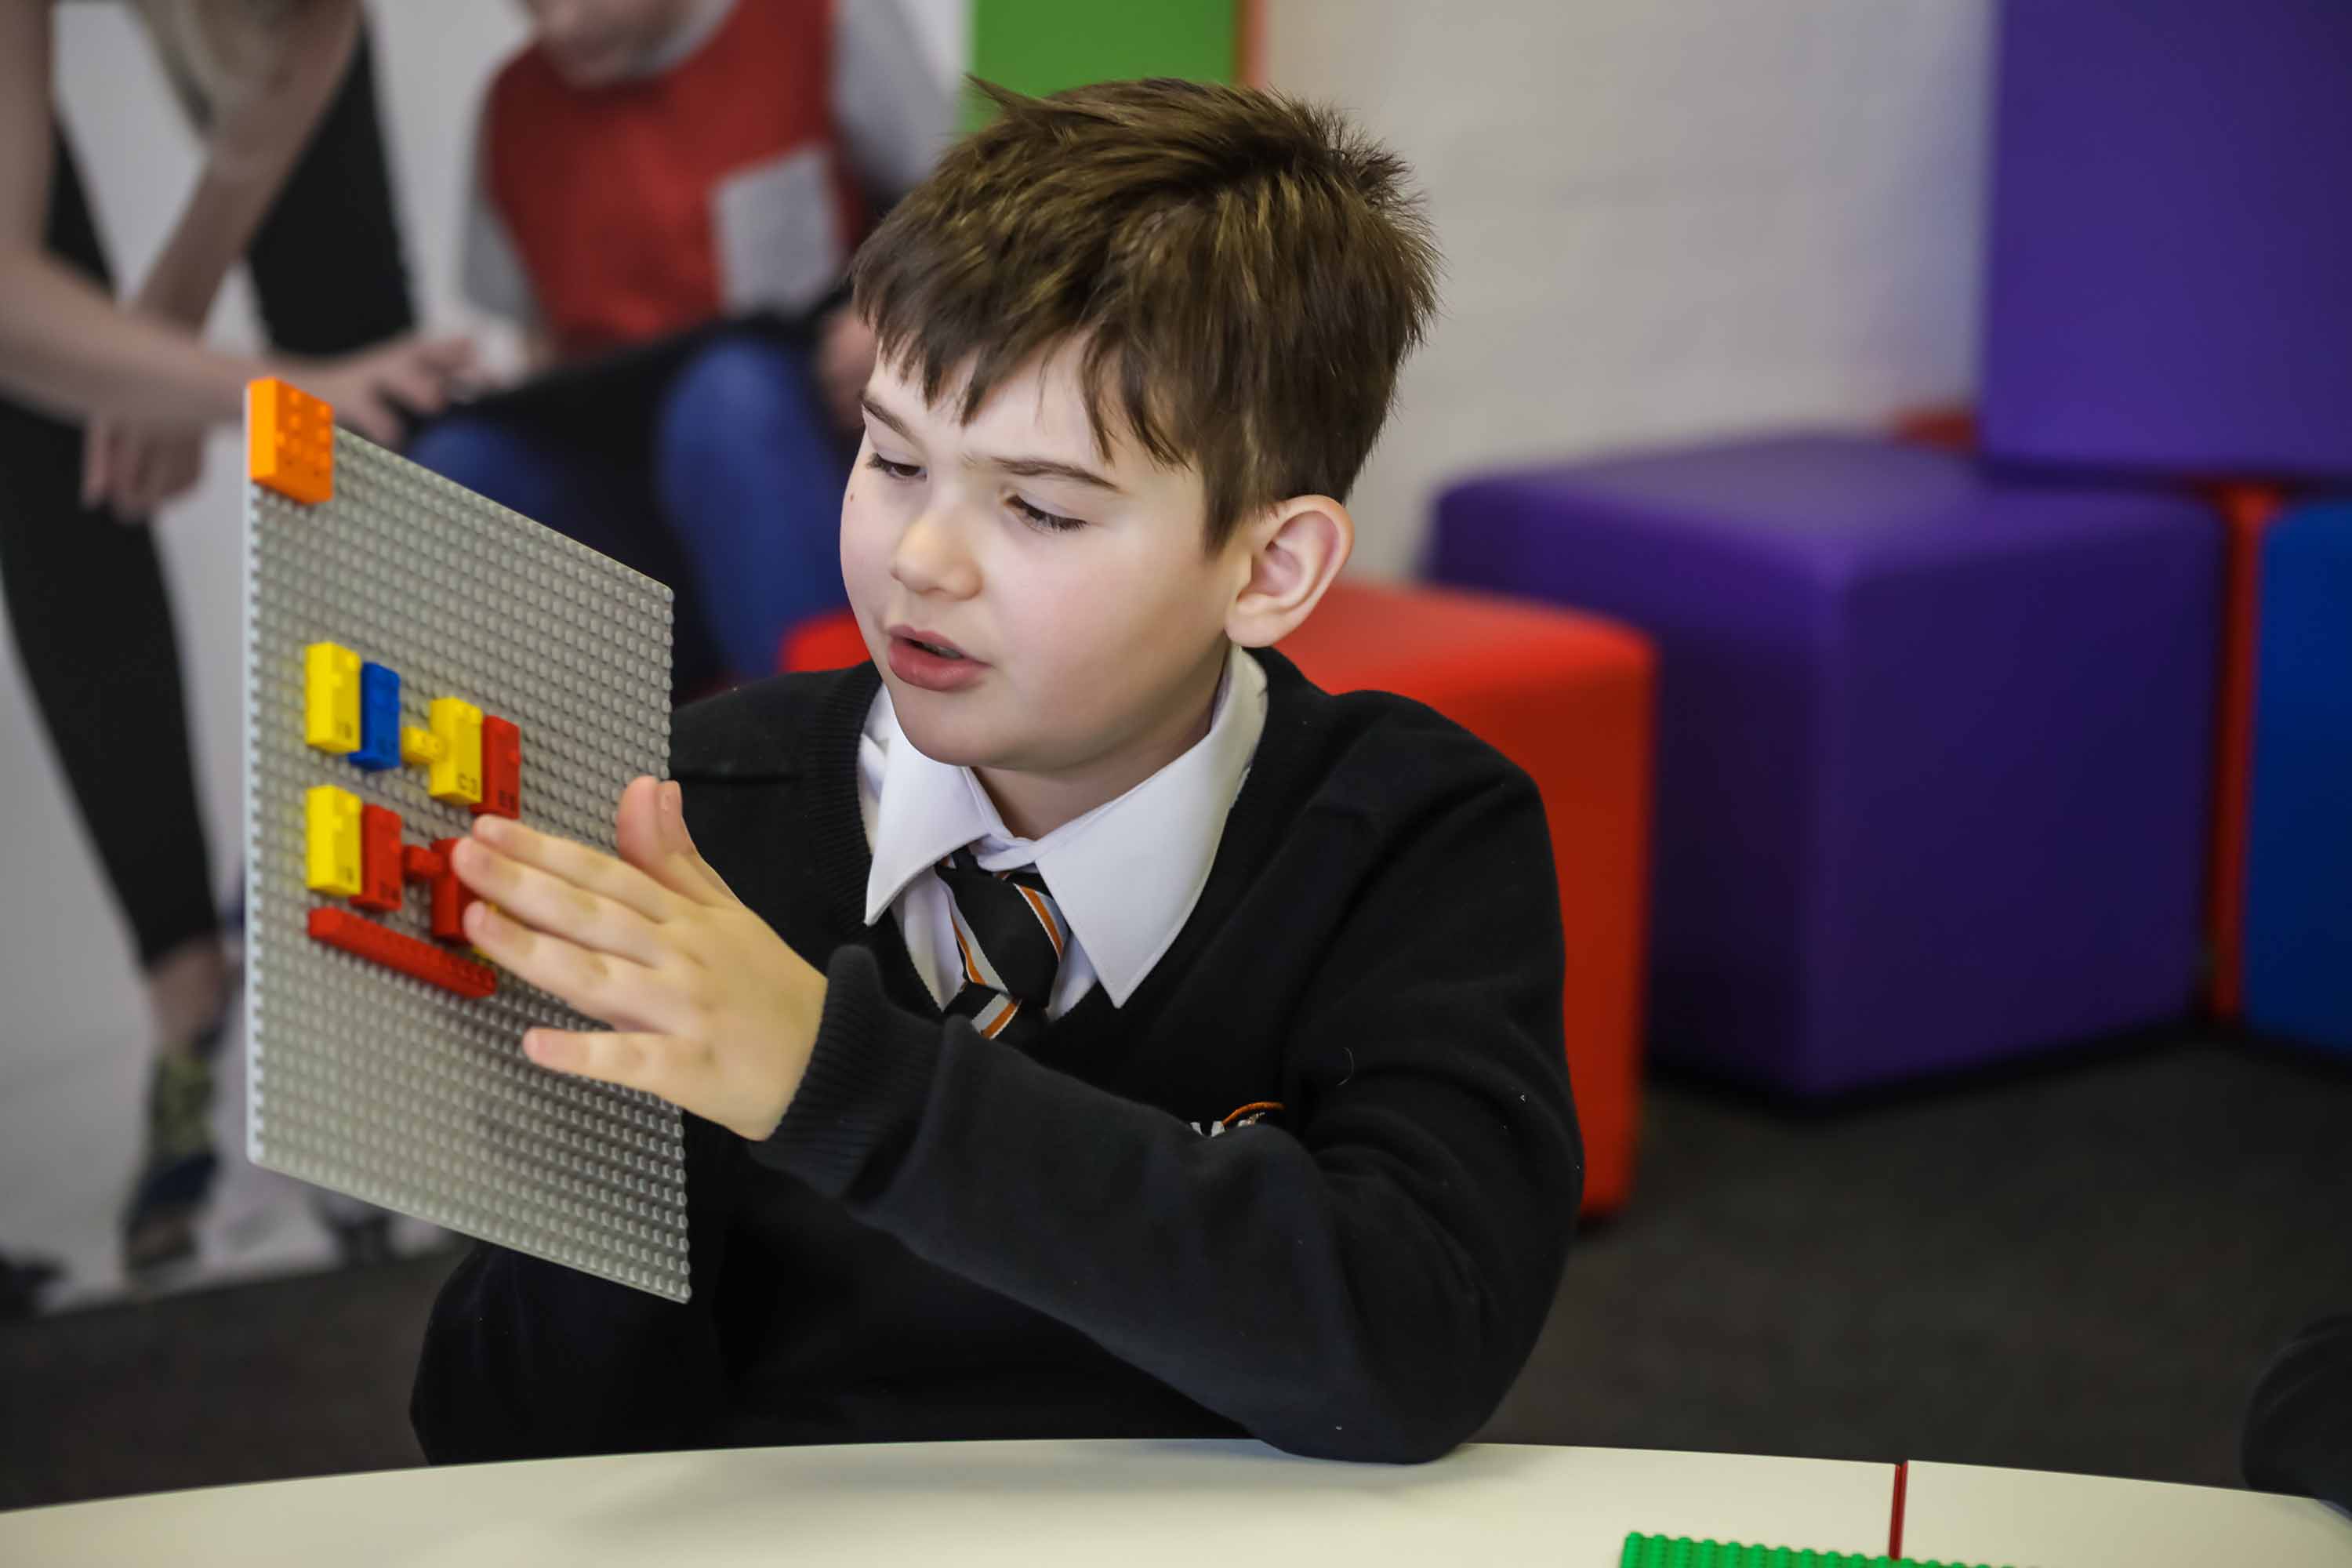 Lego releases Braille bricks to teach blind and visually impaired children